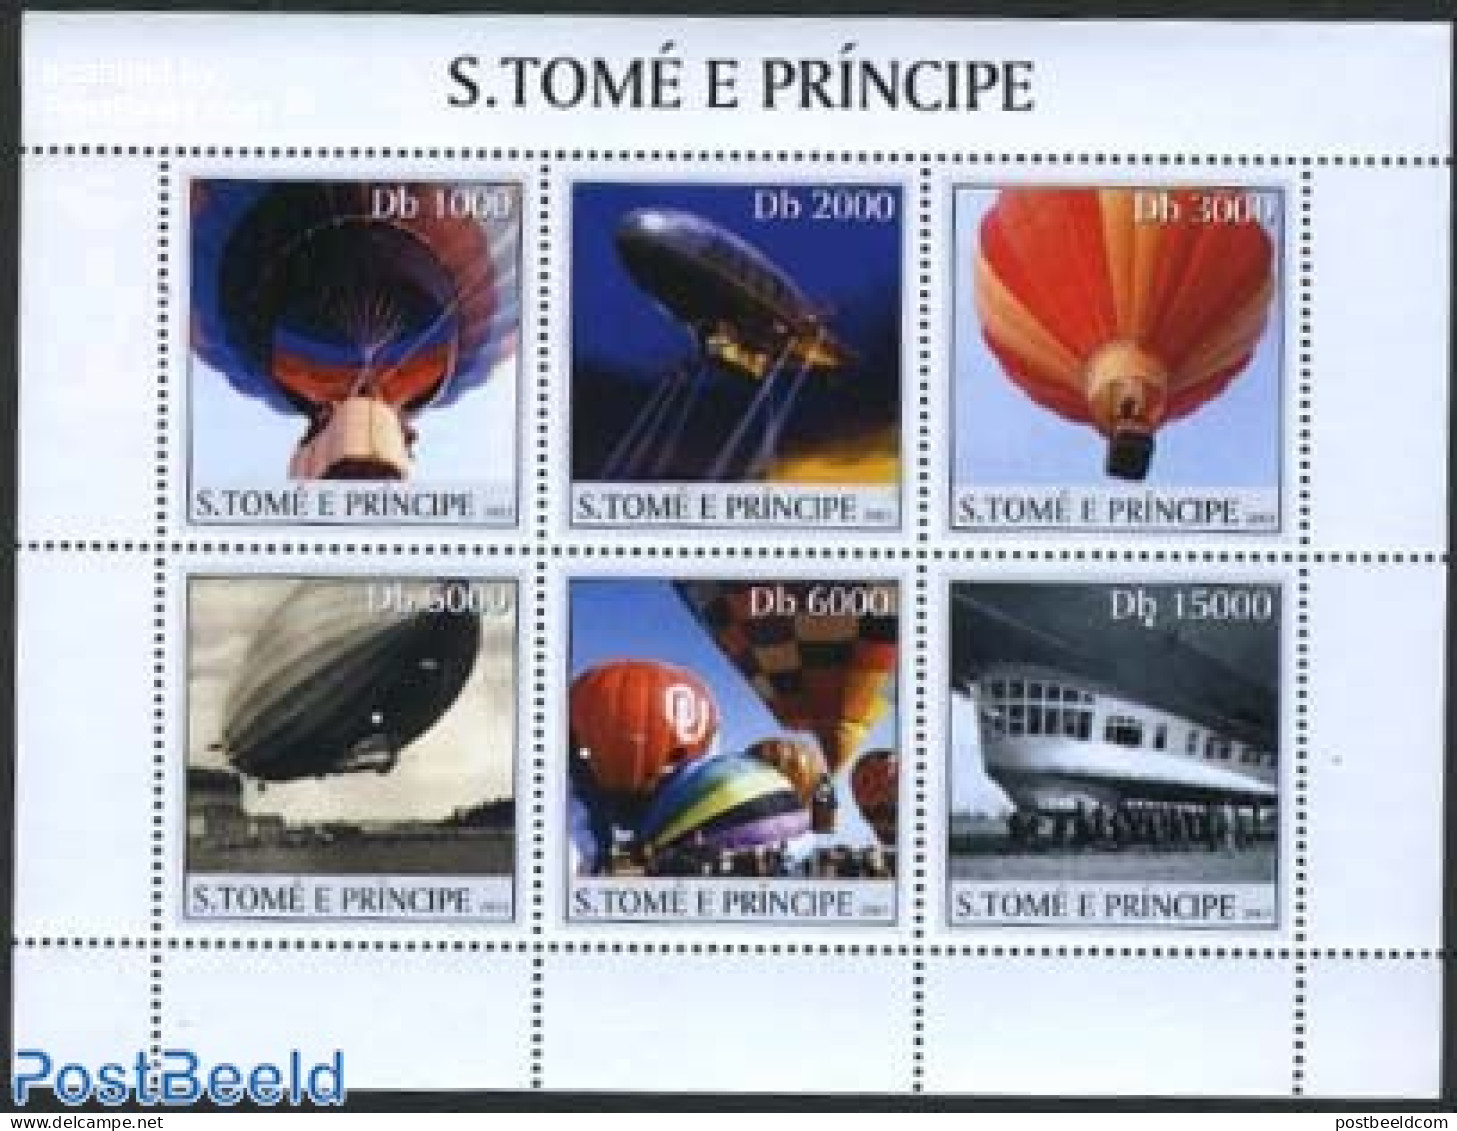 Sao Tome/Principe 2003 Ballons & Zeppelins 6v M/s, Mint NH, Transport - Balloons - Zeppelins - Fesselballons